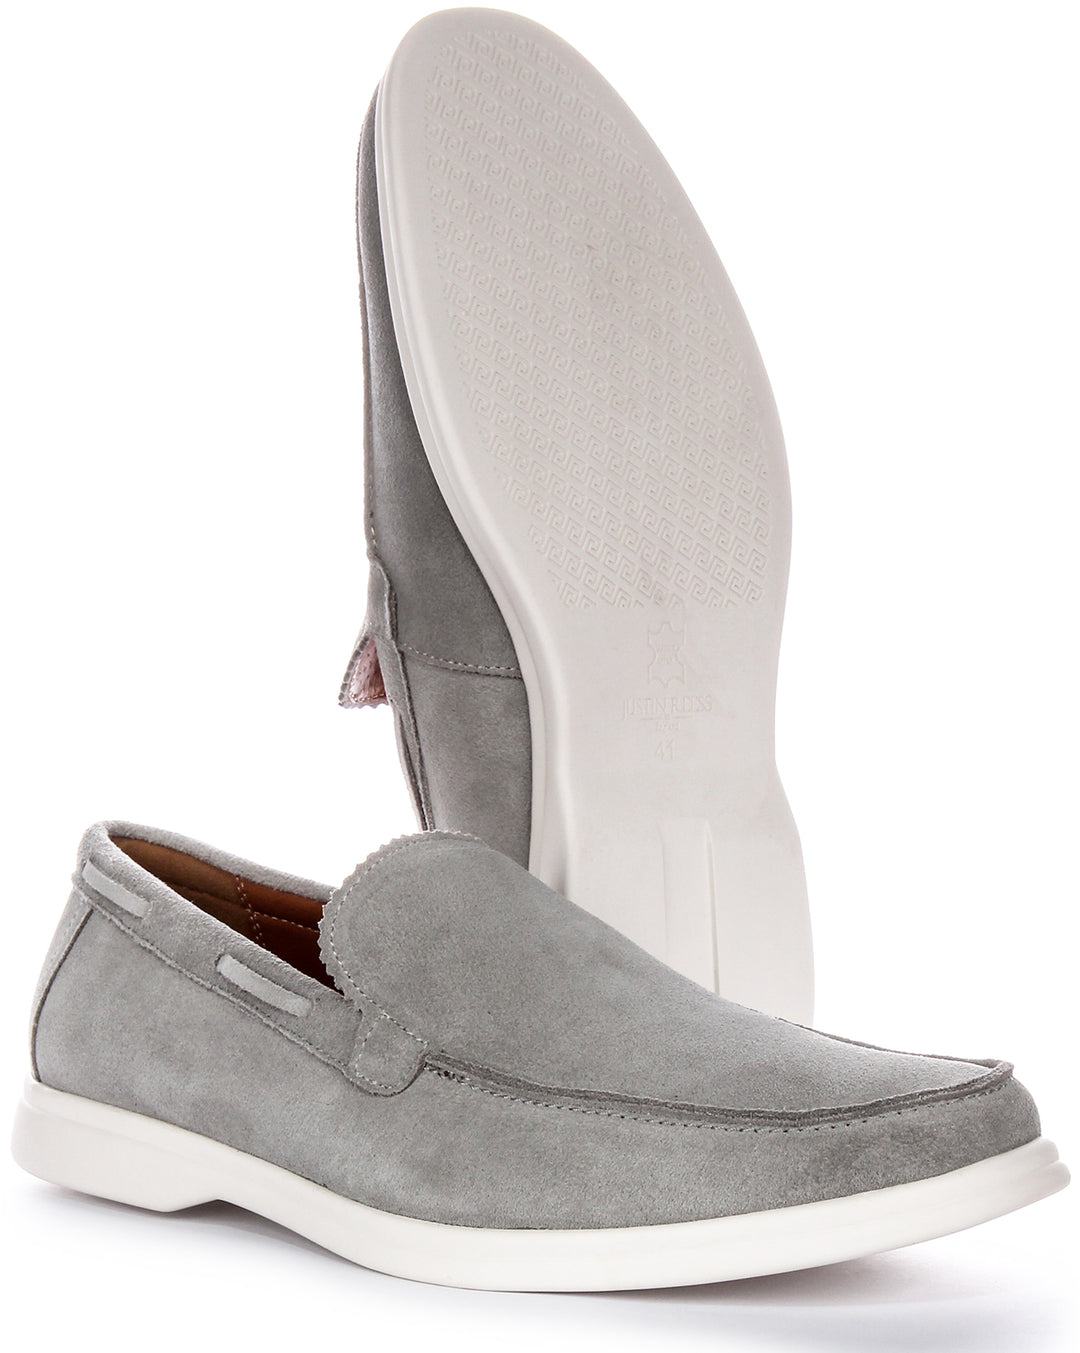 Charles Yacht Suede Loafer In Grey